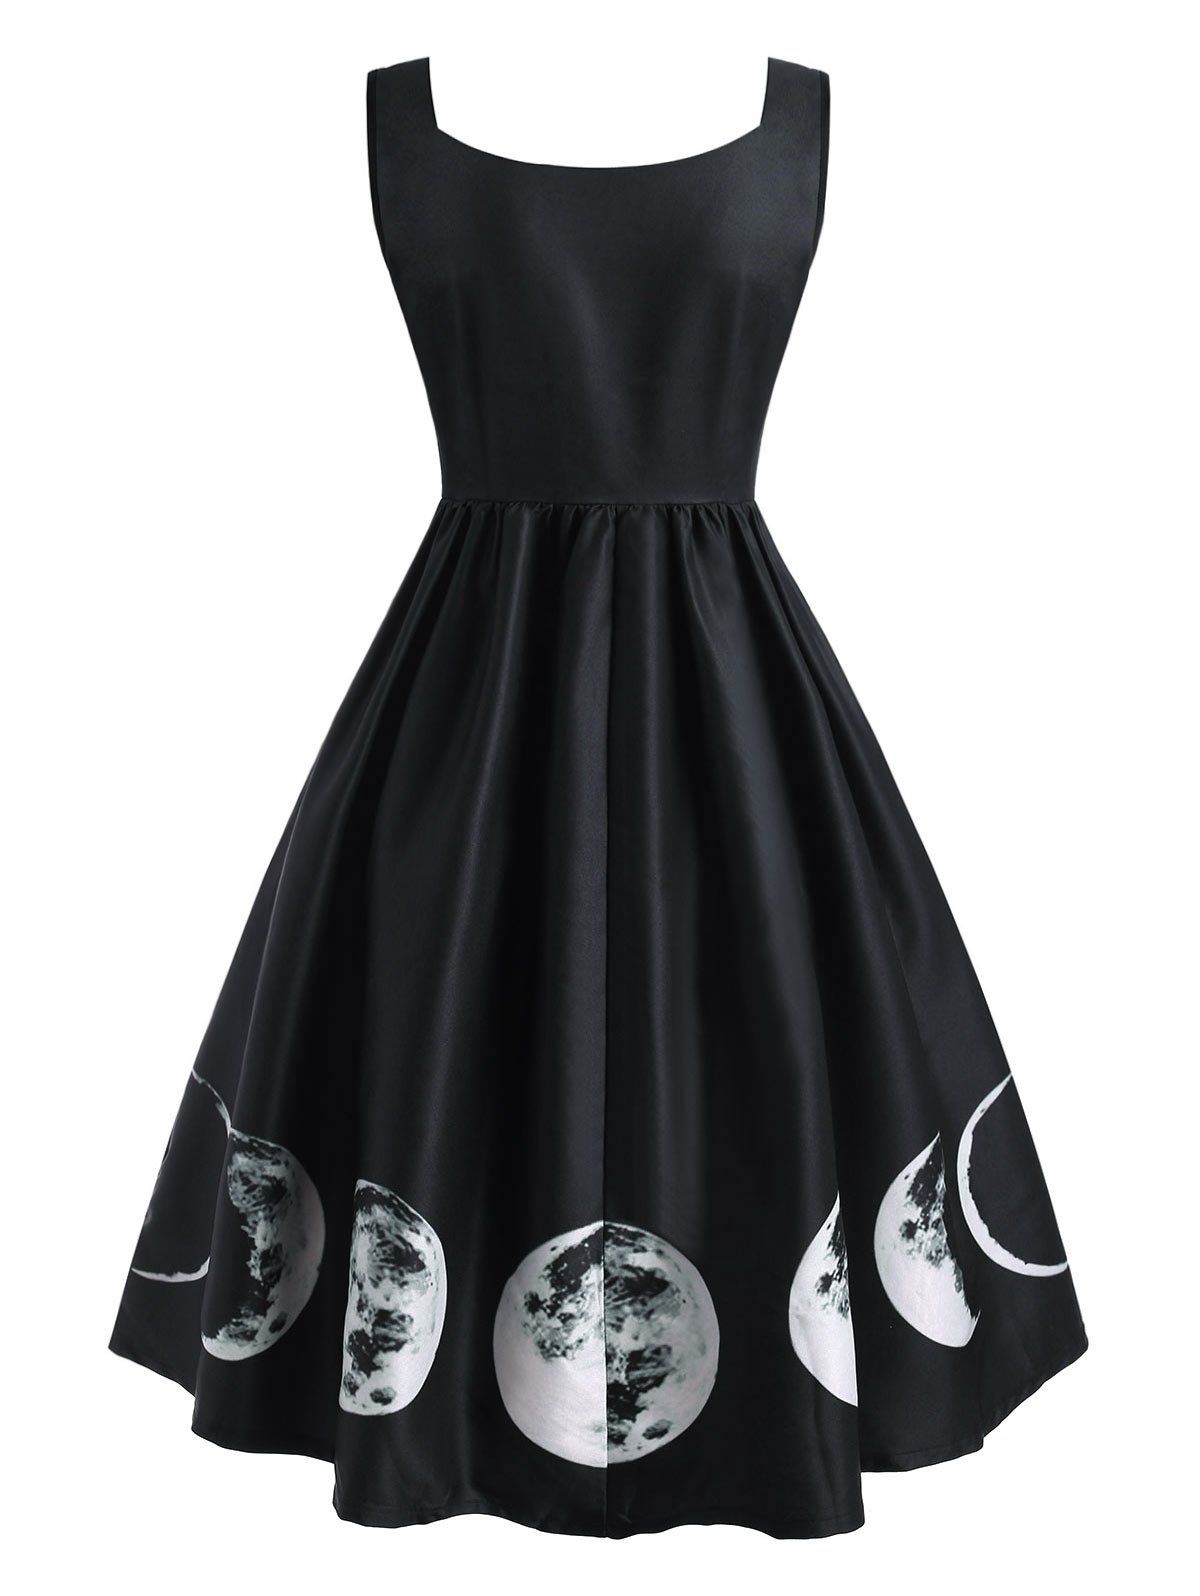 [46% OFF] 2020 Lunar Eclipse Print Dress With Lace Insert Corset In ...